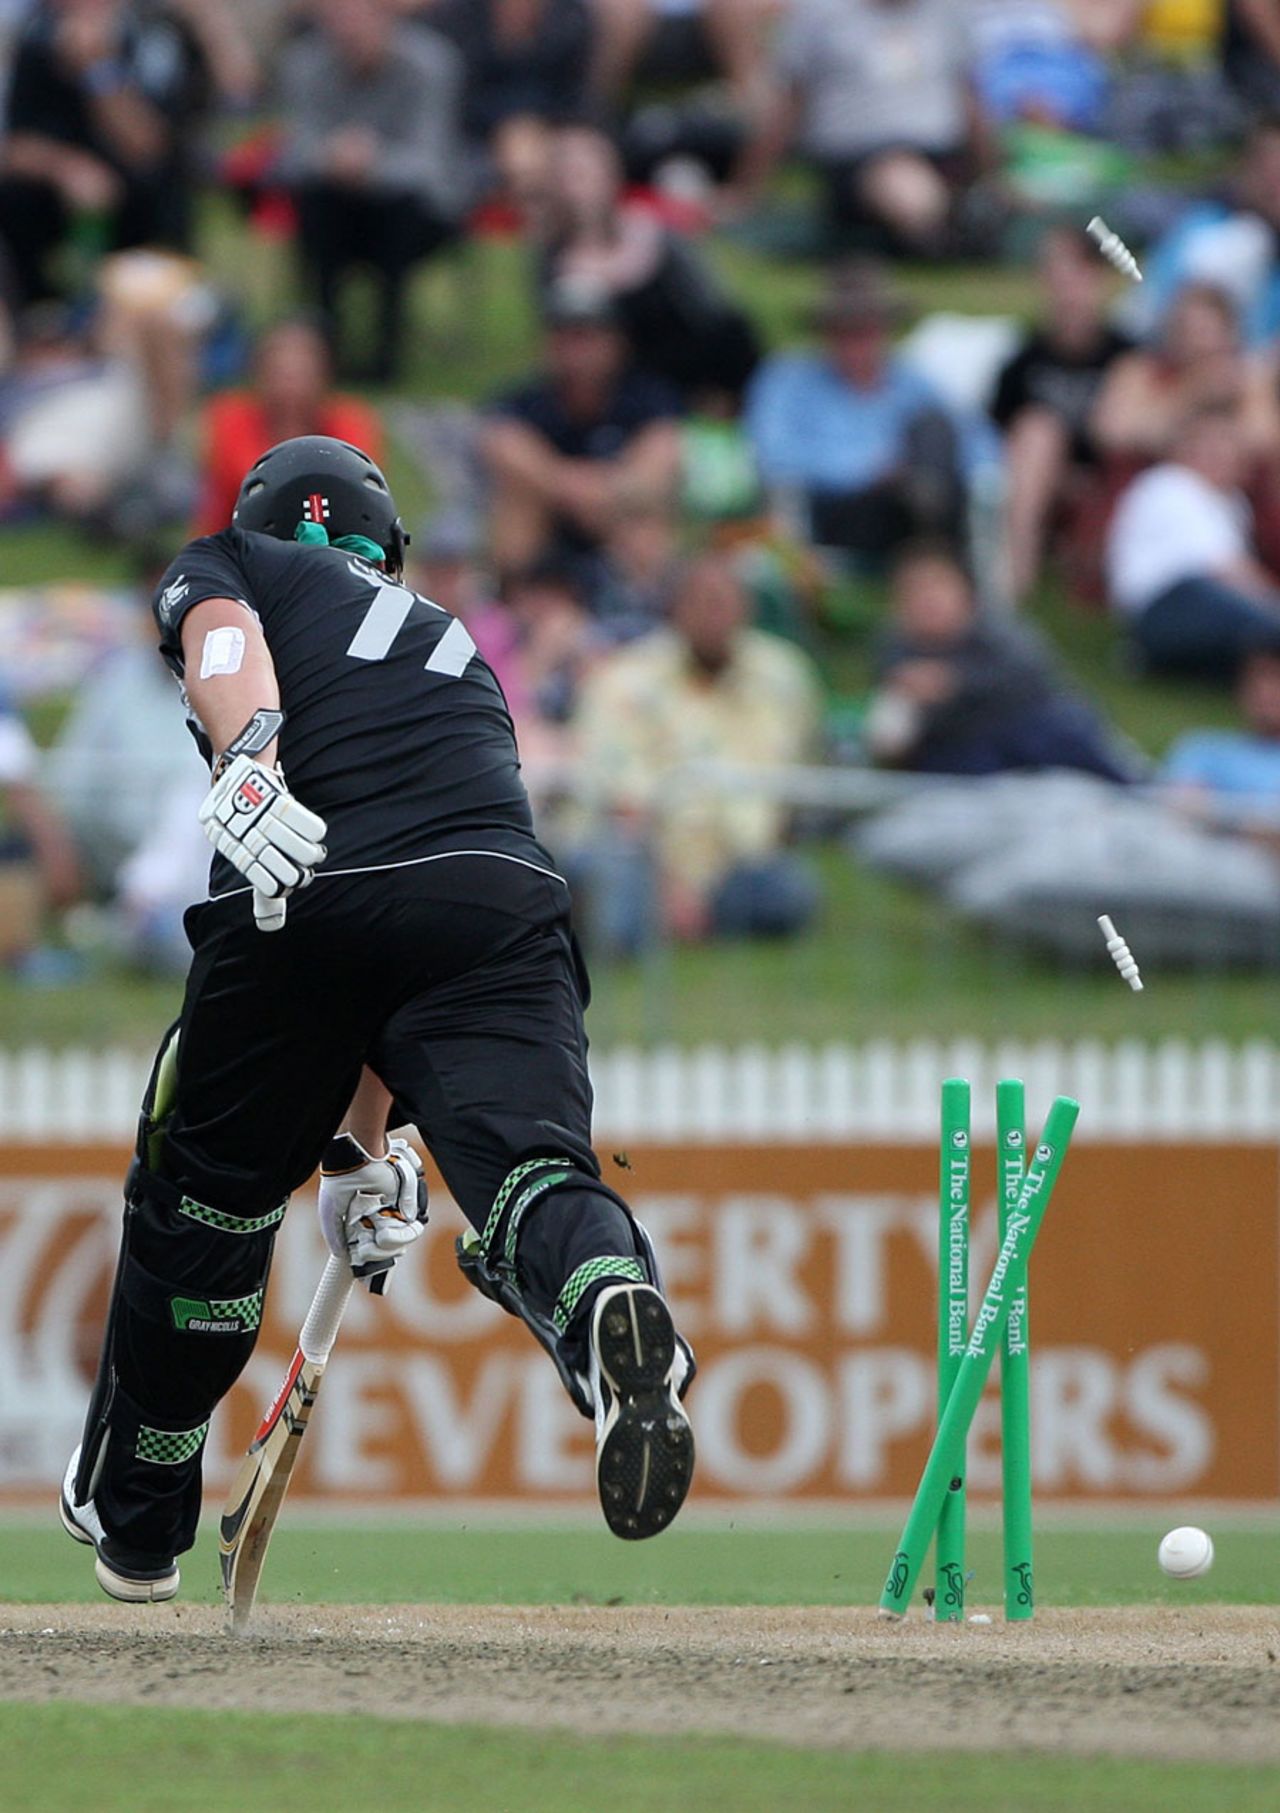 Jesse Ryder was run out without facing a ball from the first over of the innings, New Zealand v Pakistan, 5th ODI, Hamilton, February 3, 2011